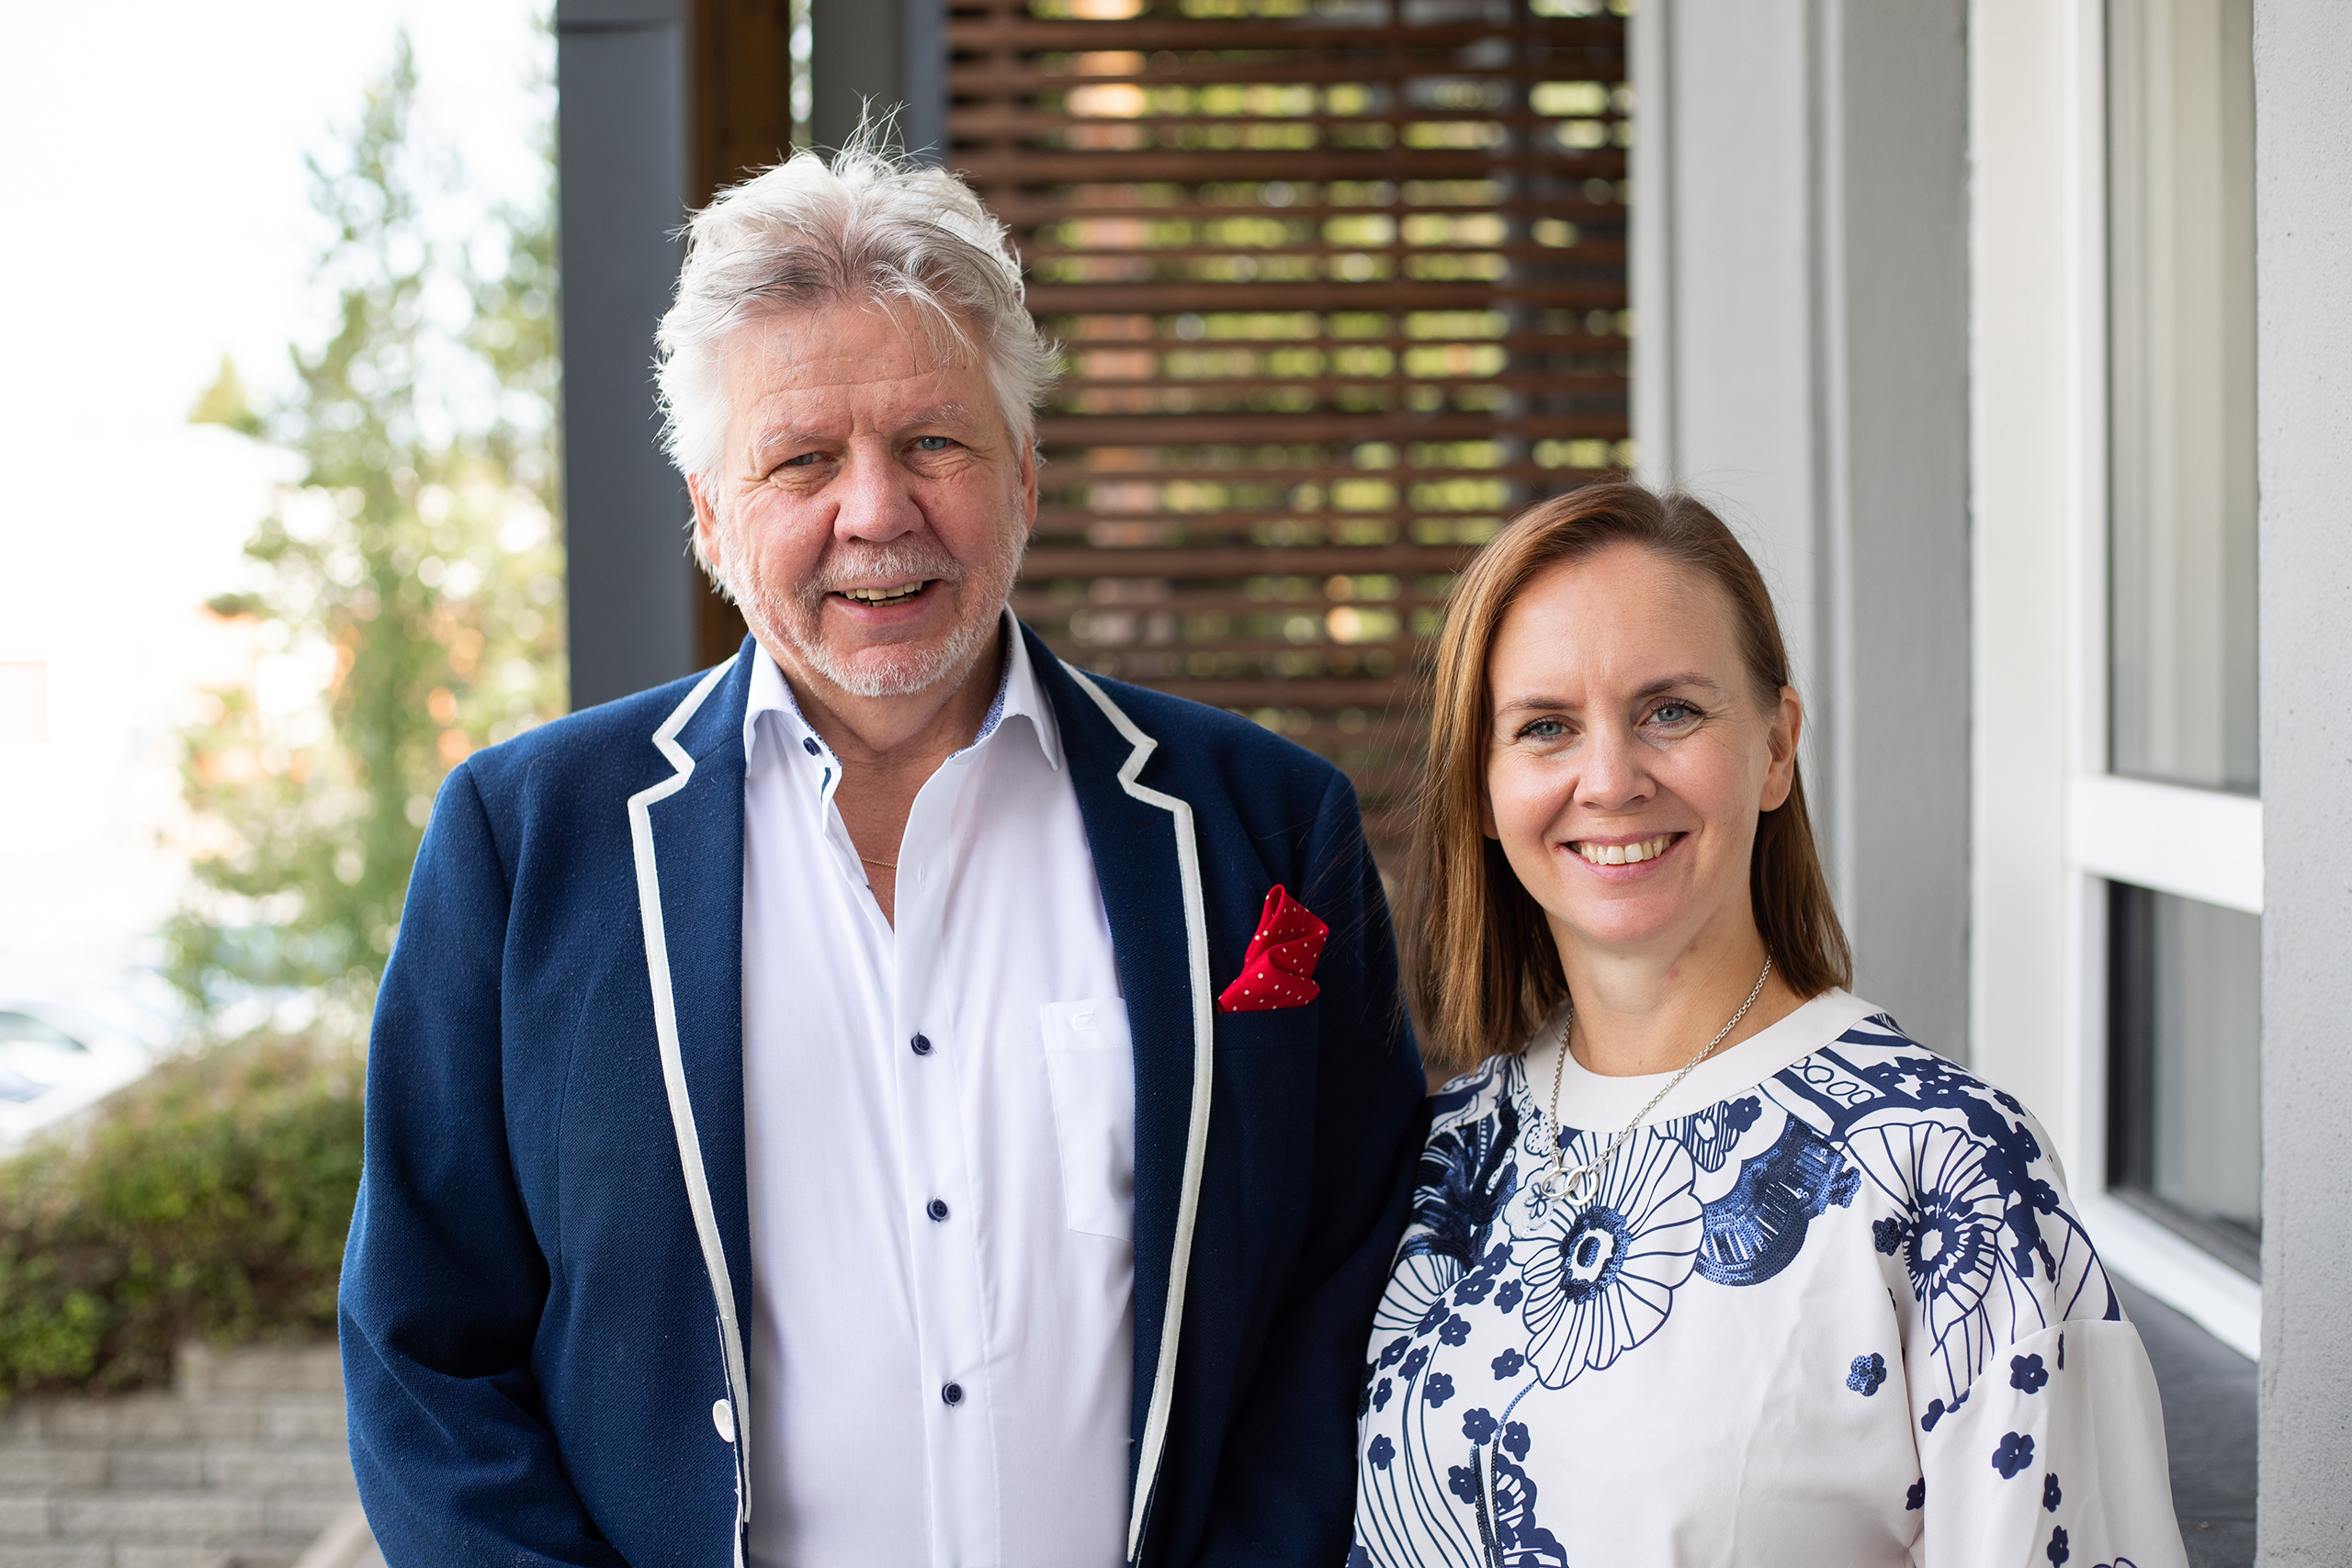 Hans Ahola continues as Chairman of the board and Ida Saavalainen takes over as the Group CEO